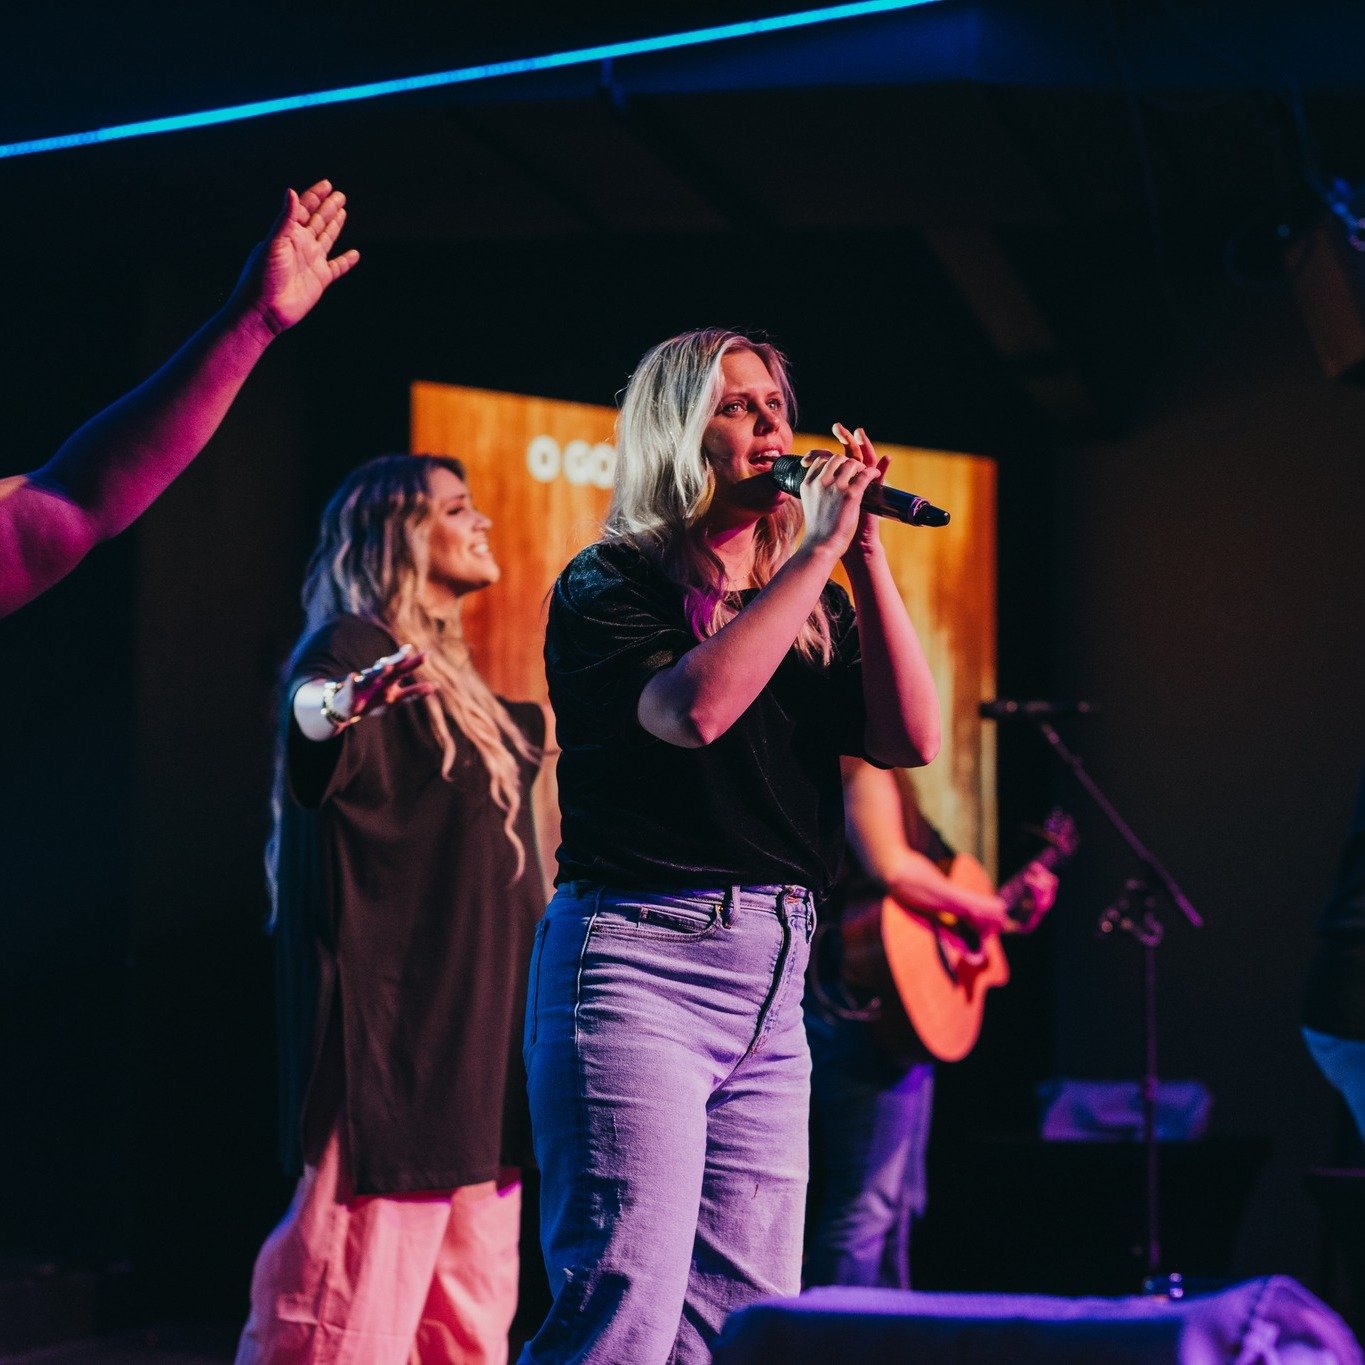 Such an amazing Sunday! We worshipped together, heard a powerful word about how God protects us, and connected as spiritual family from the youngest to the oldest. We are already looking forward to next week!